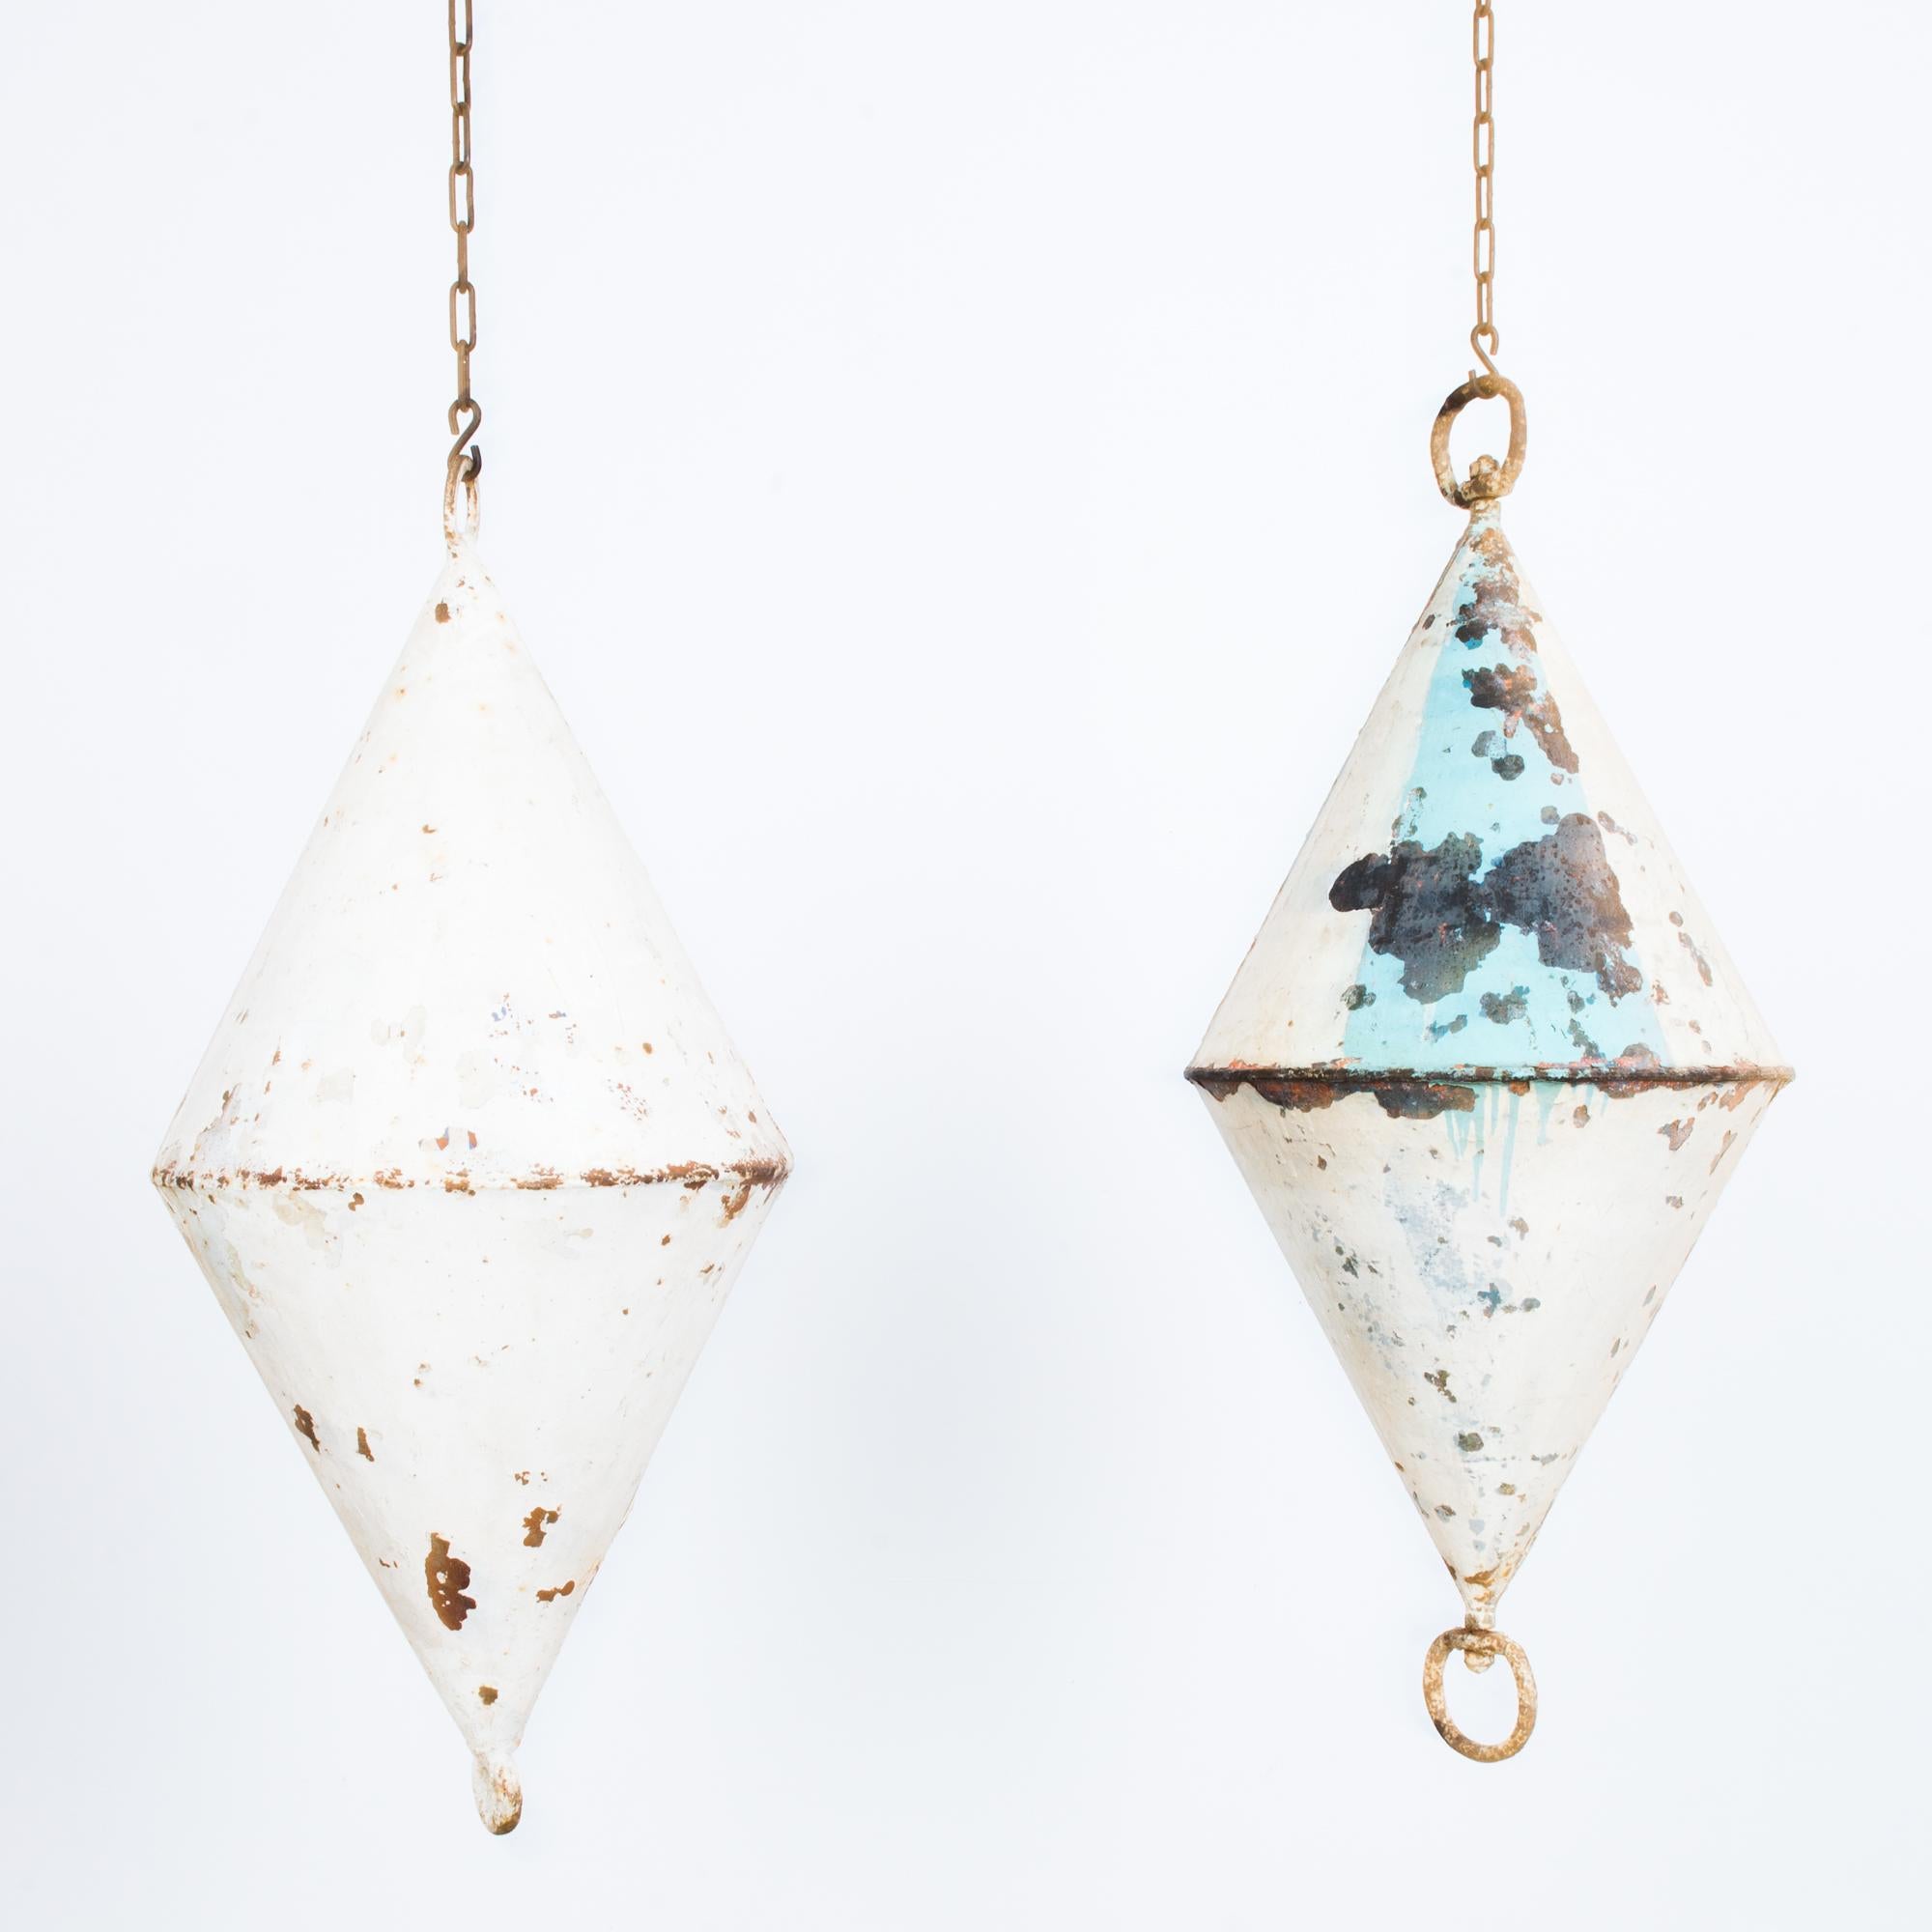 This pair of bicone-shaped metal buoys was made in Belgium, circa 1950. Both buoys hang from chains and are painted white with triangular sky blue areas on one. They sport an oxidized patina and will bring a coastal charm to your interior space.